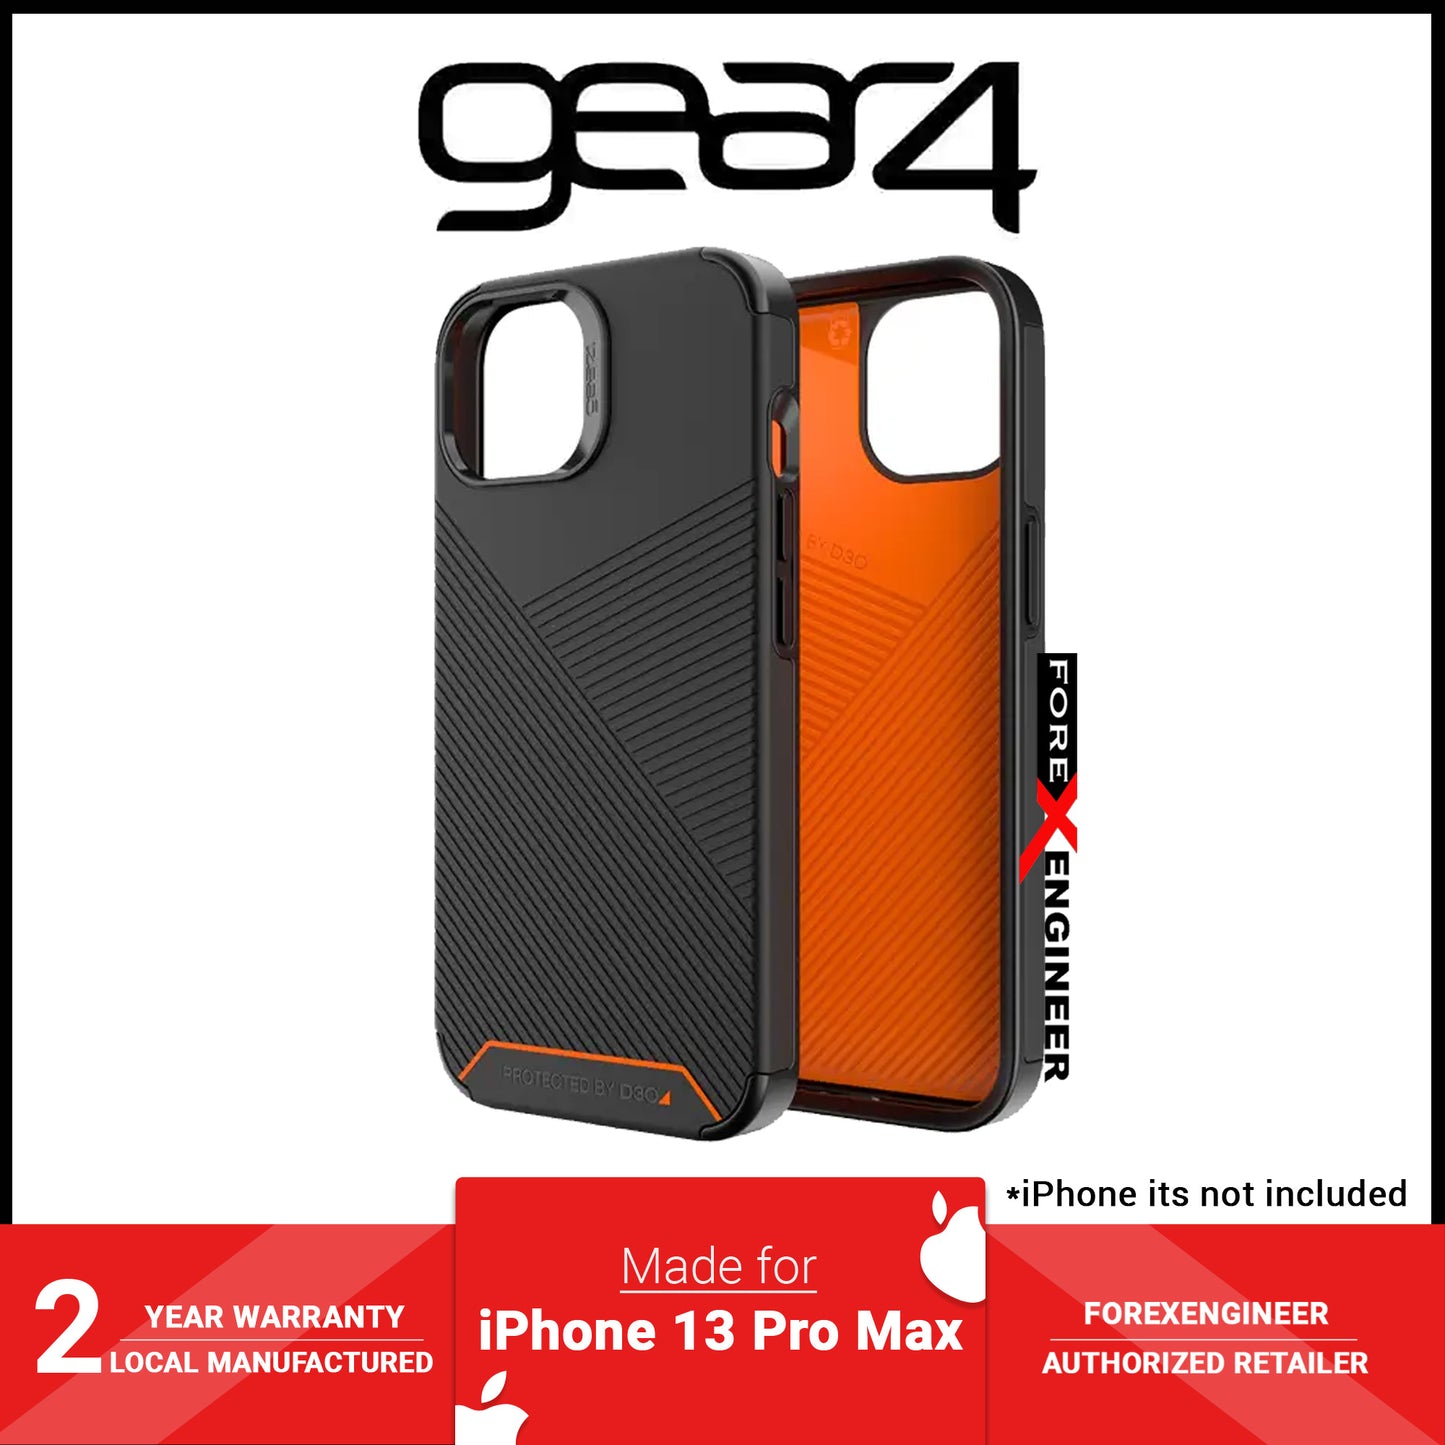 Gear4 Denali for iPhone 13 Pro Max 6.7" 5G - Black (Barcode: 840056146679 )